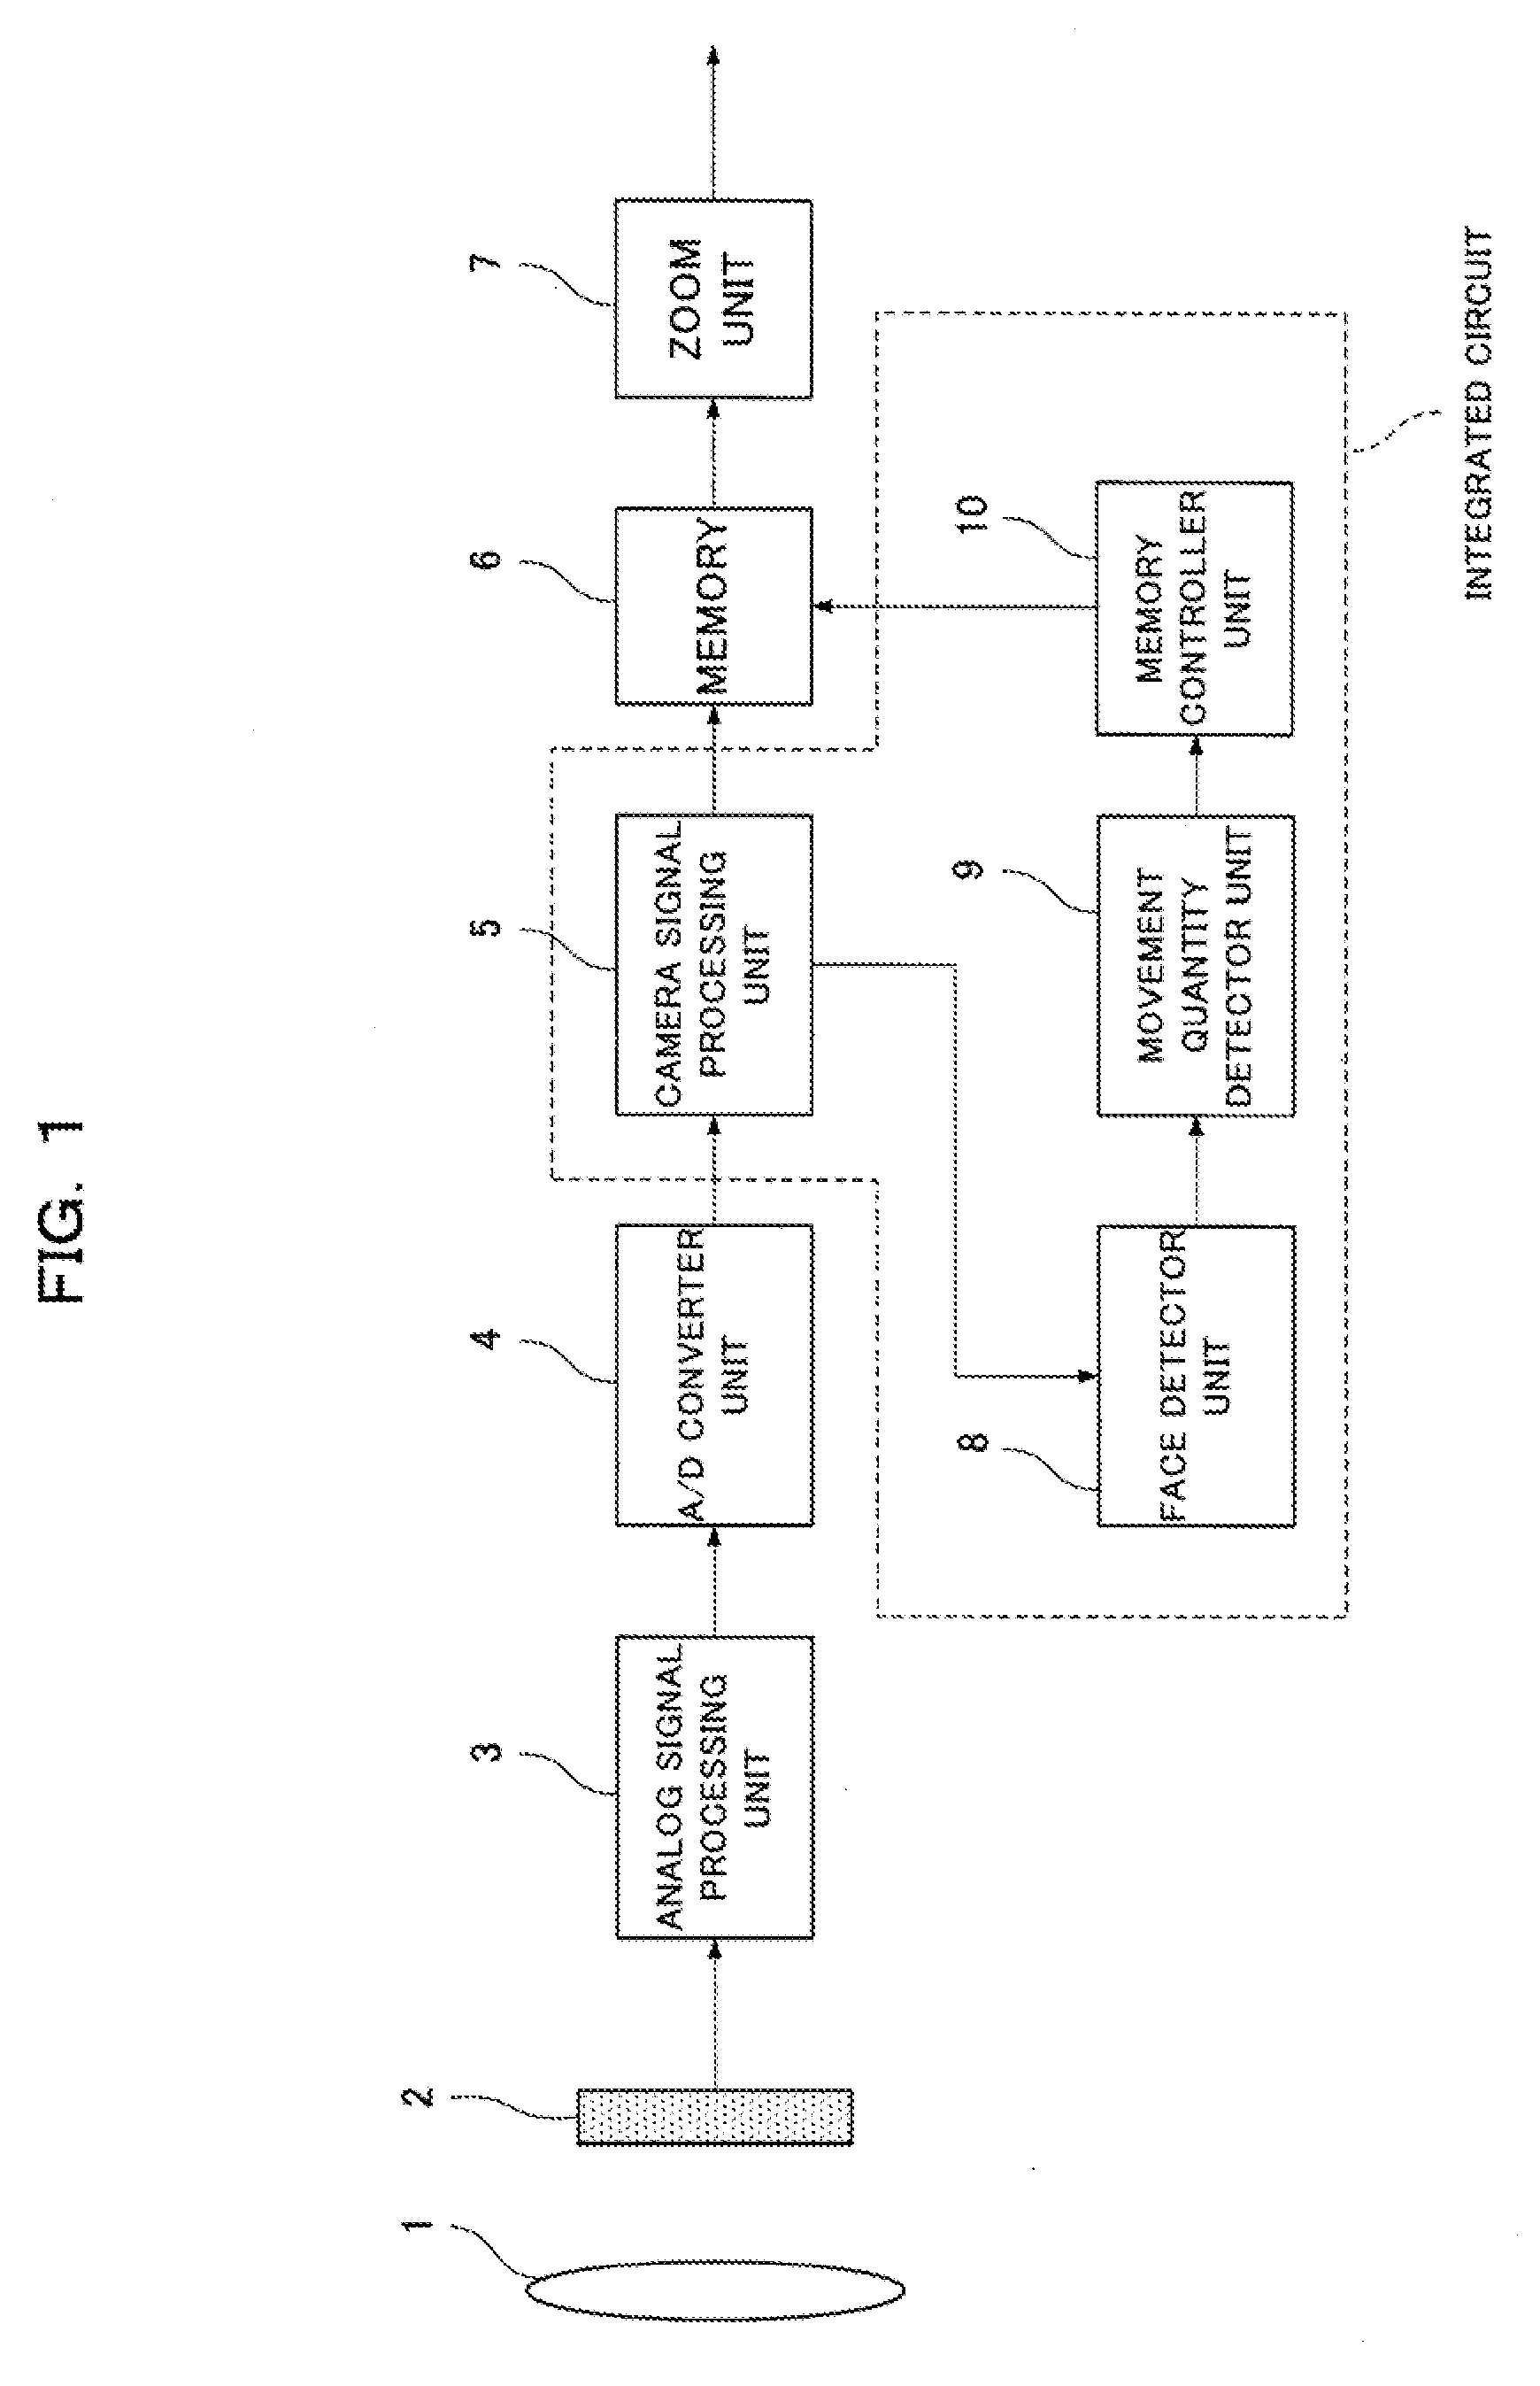 Image capture device and integrated circuit